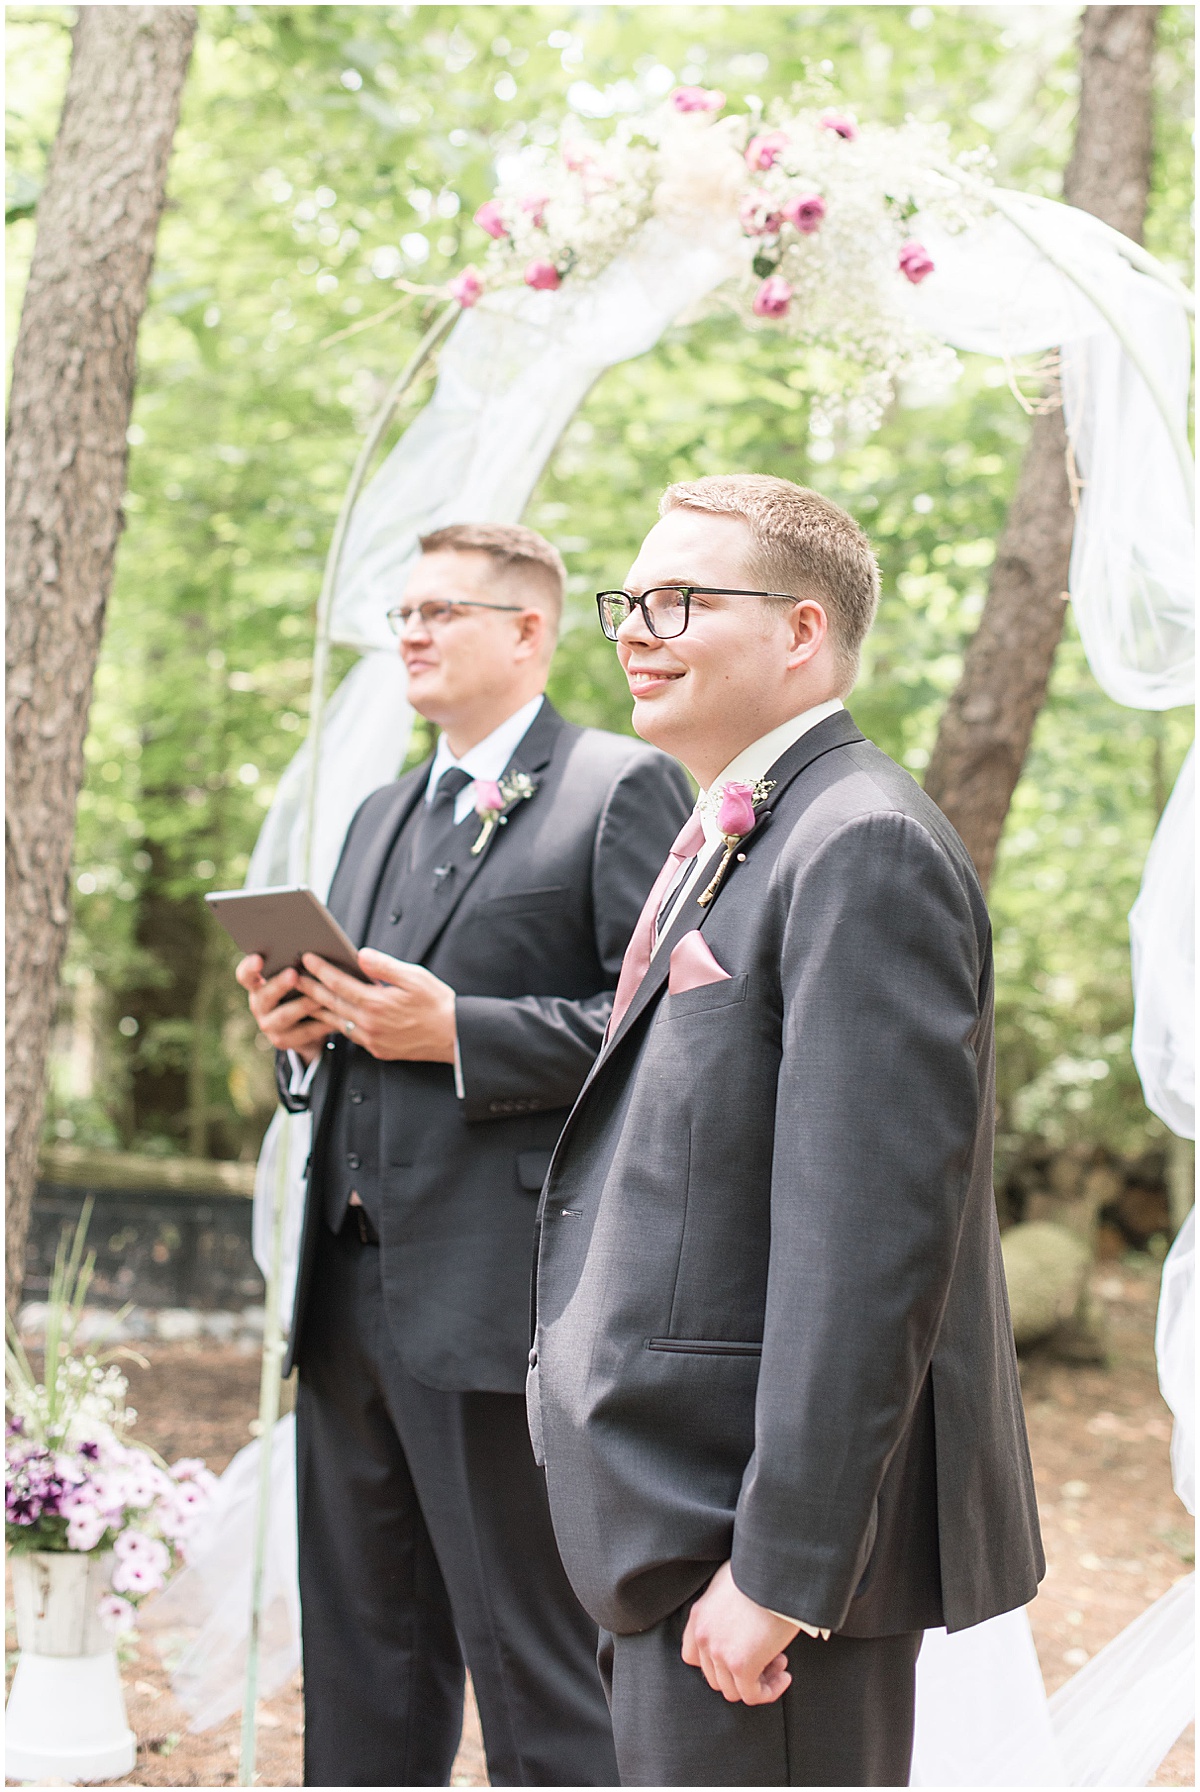 COVID backyard wedding in West Lafayette, Indiana by Victoria Rayburn Photography